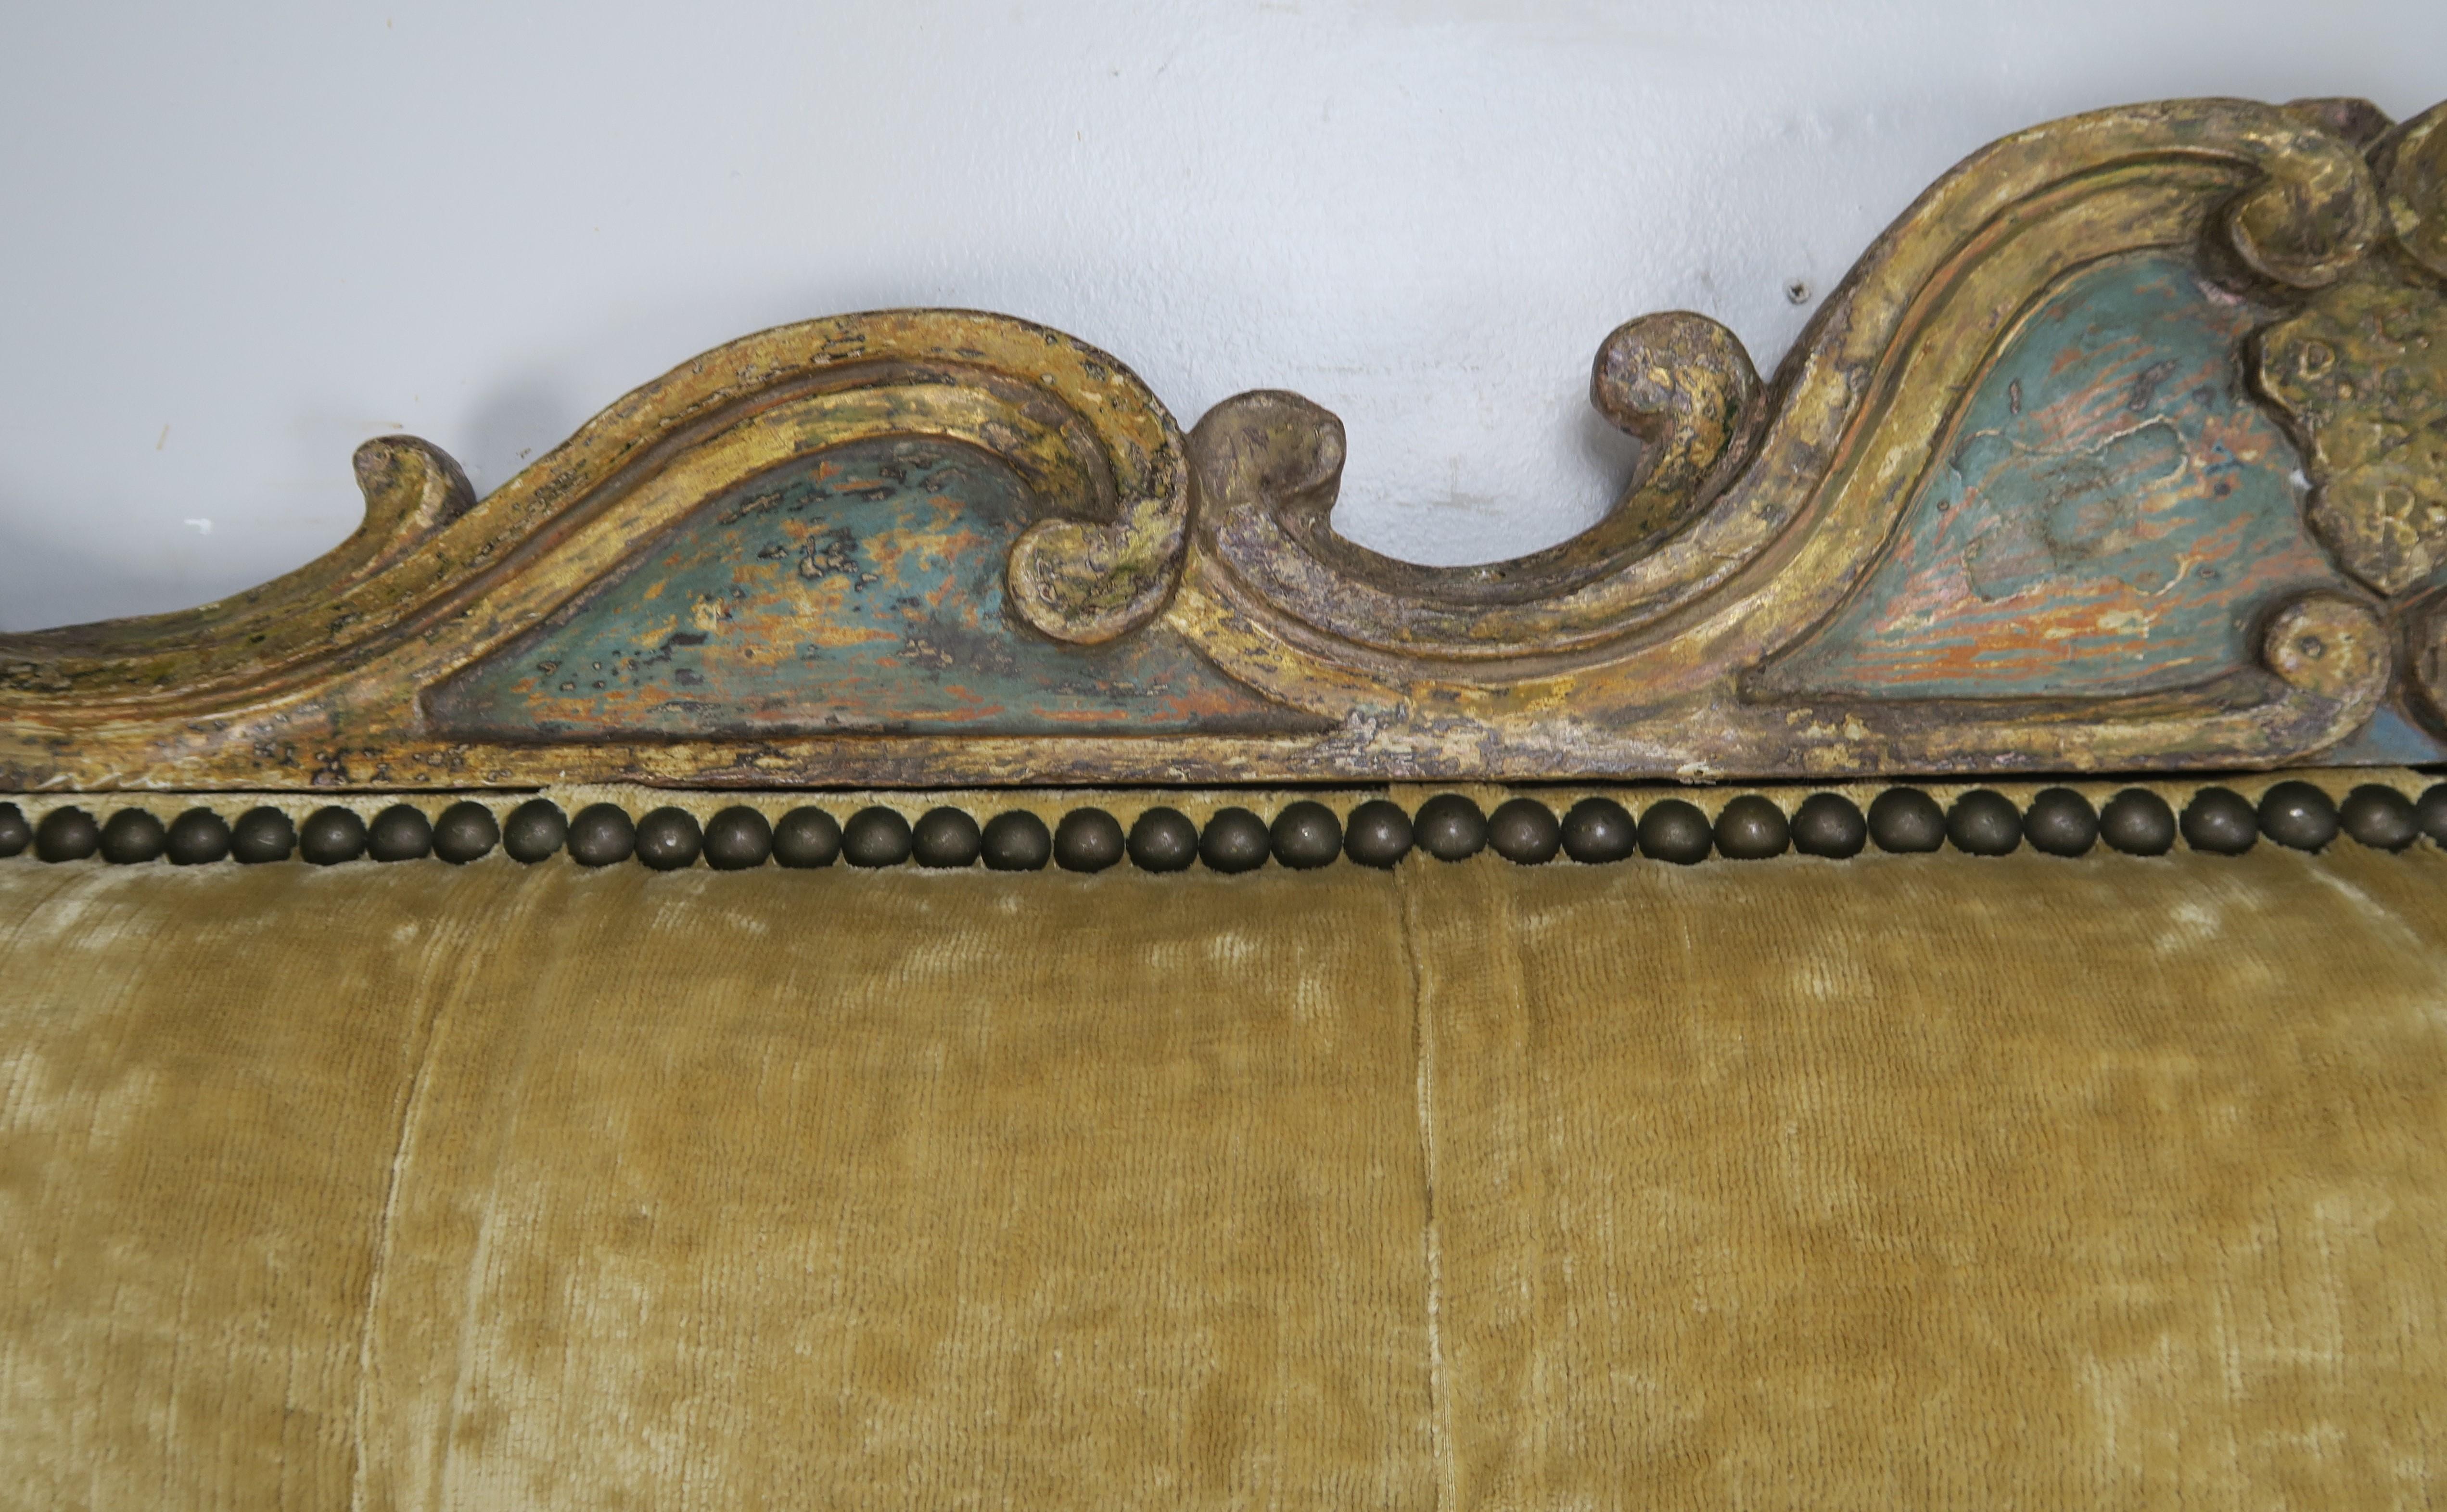 Custom king size headboard upholstered with a golden colored linen tufted velvet and finished with a 19th century Italian painted carving at top of the headboard. Also detailed with antique brass colored nailhead trim.